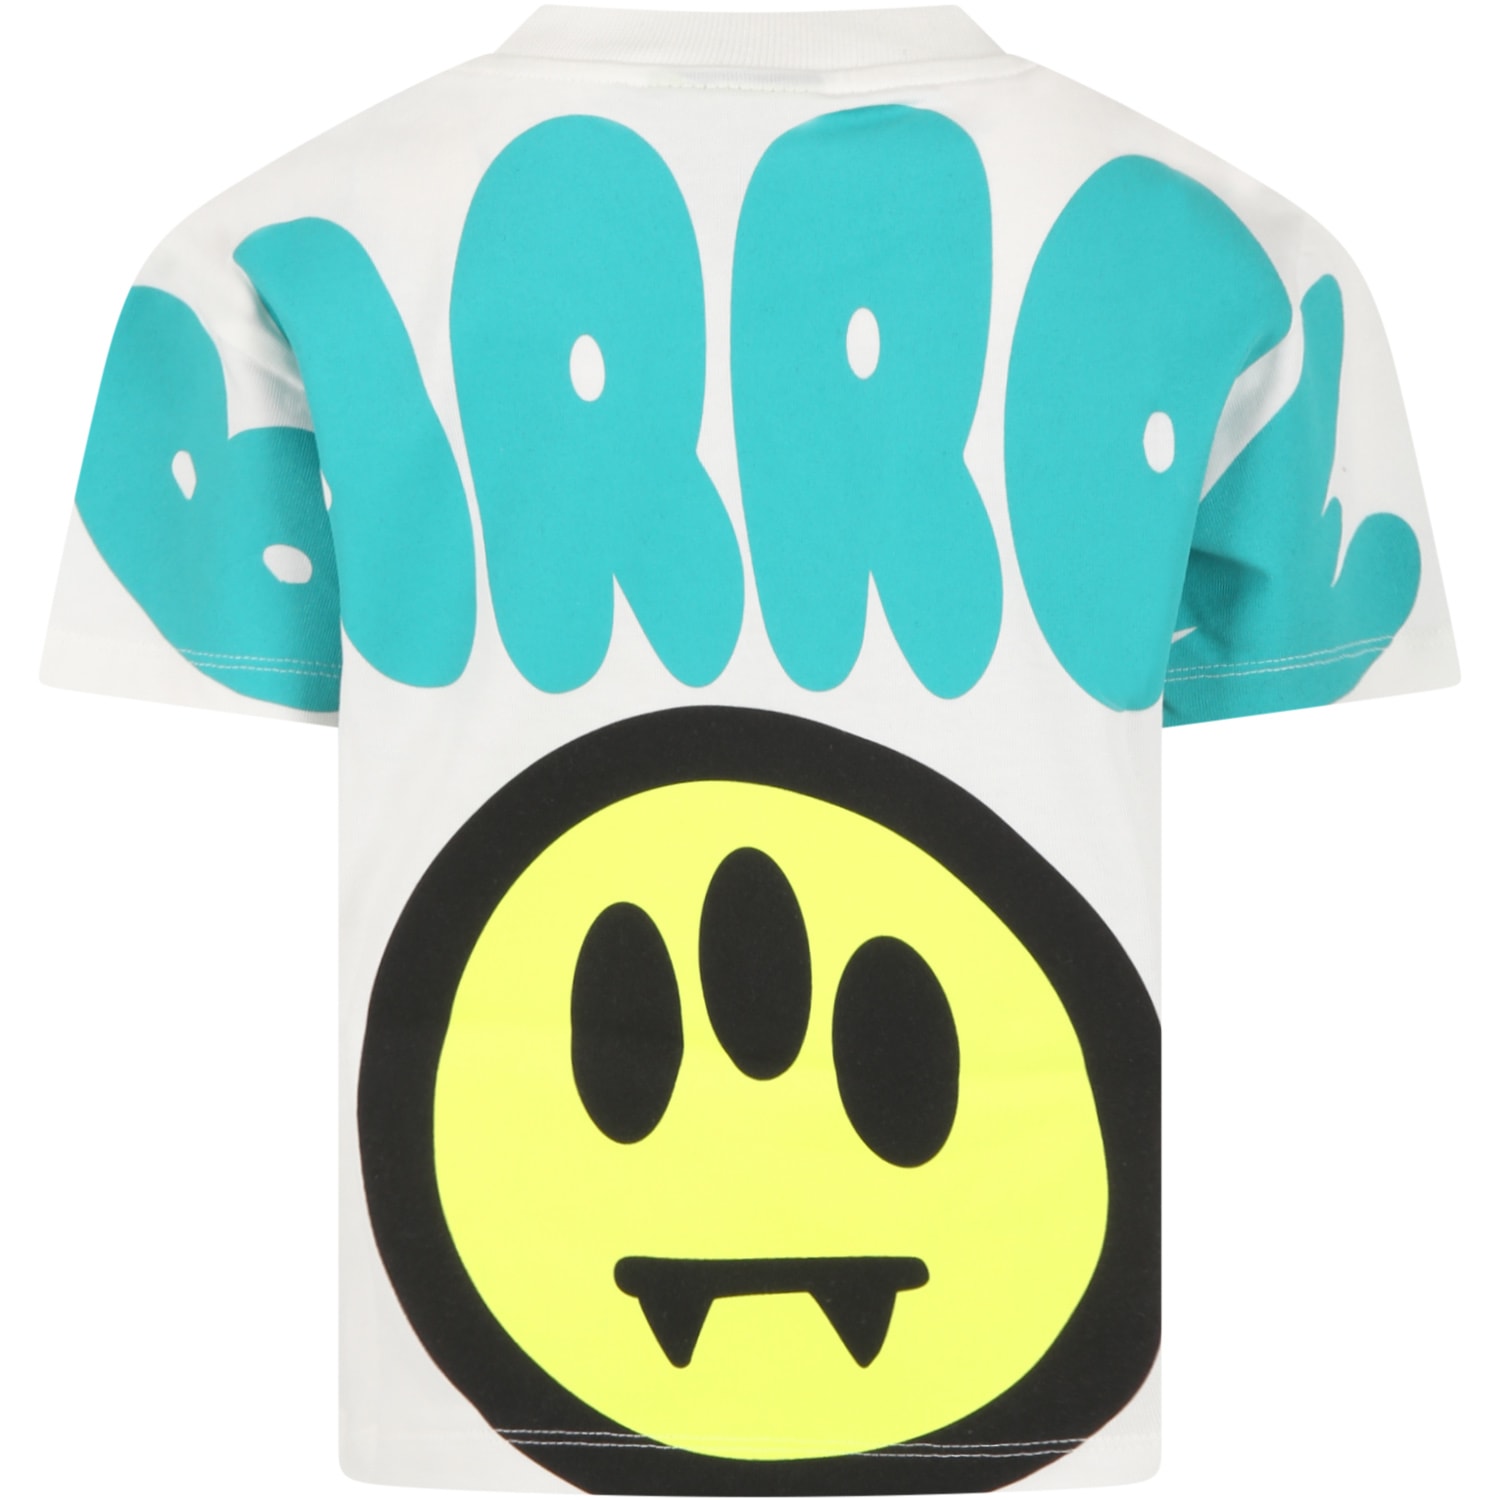 Barrow White T-shirt For Kids With Logo And Iconic Smiley